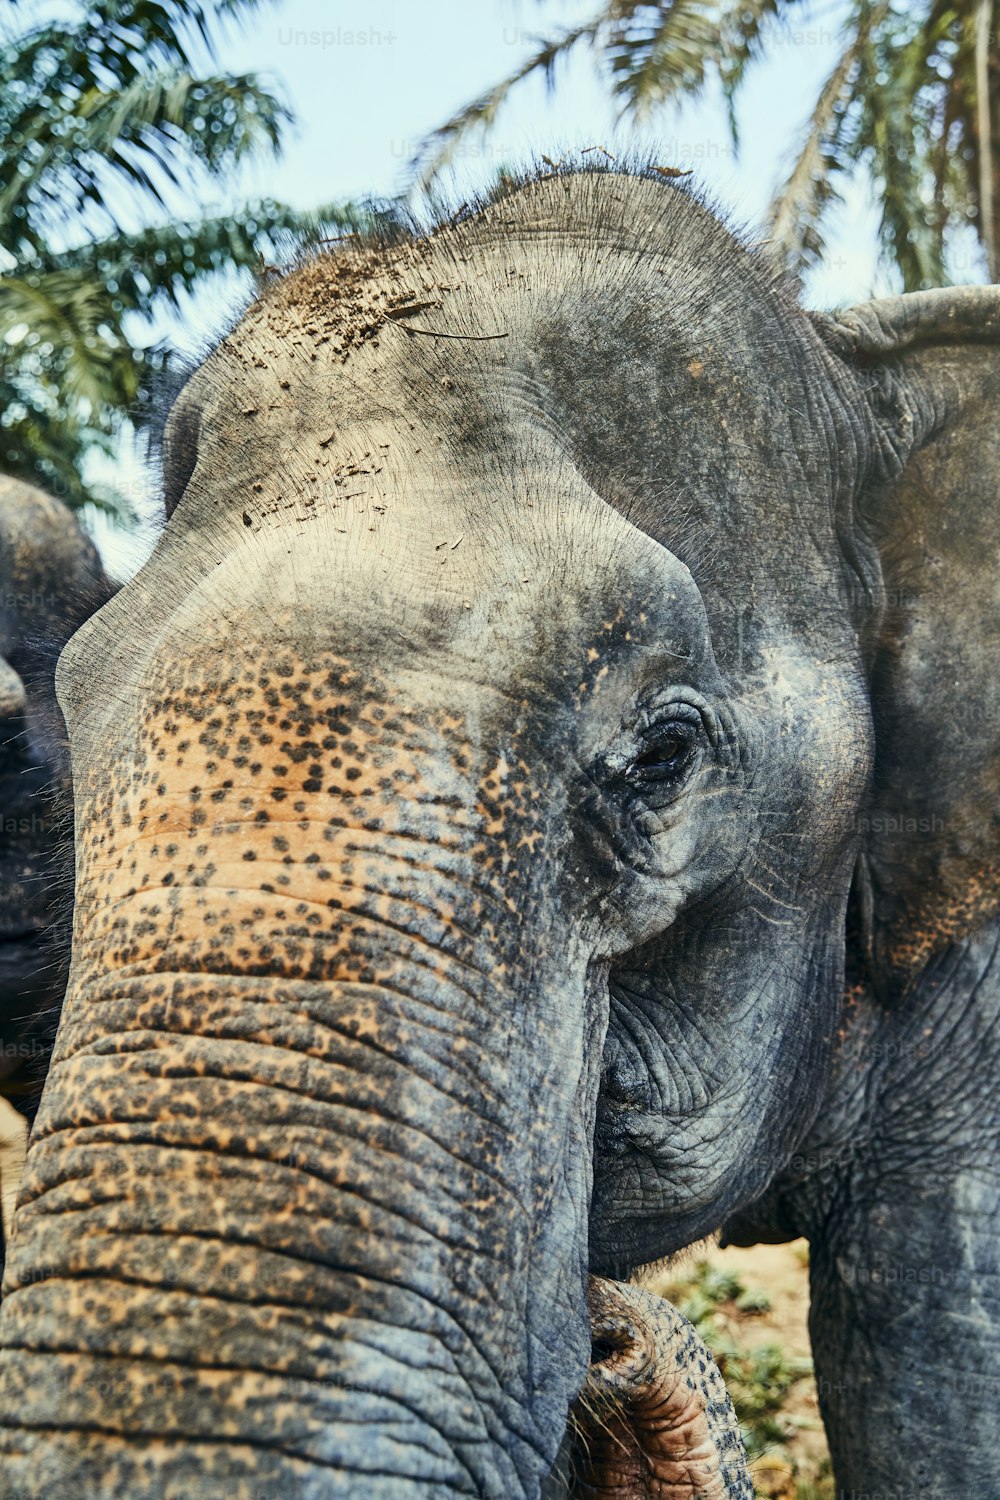 Closeup of the head and trunk of a large Asian elephant at an animal sanctuary in Thailand